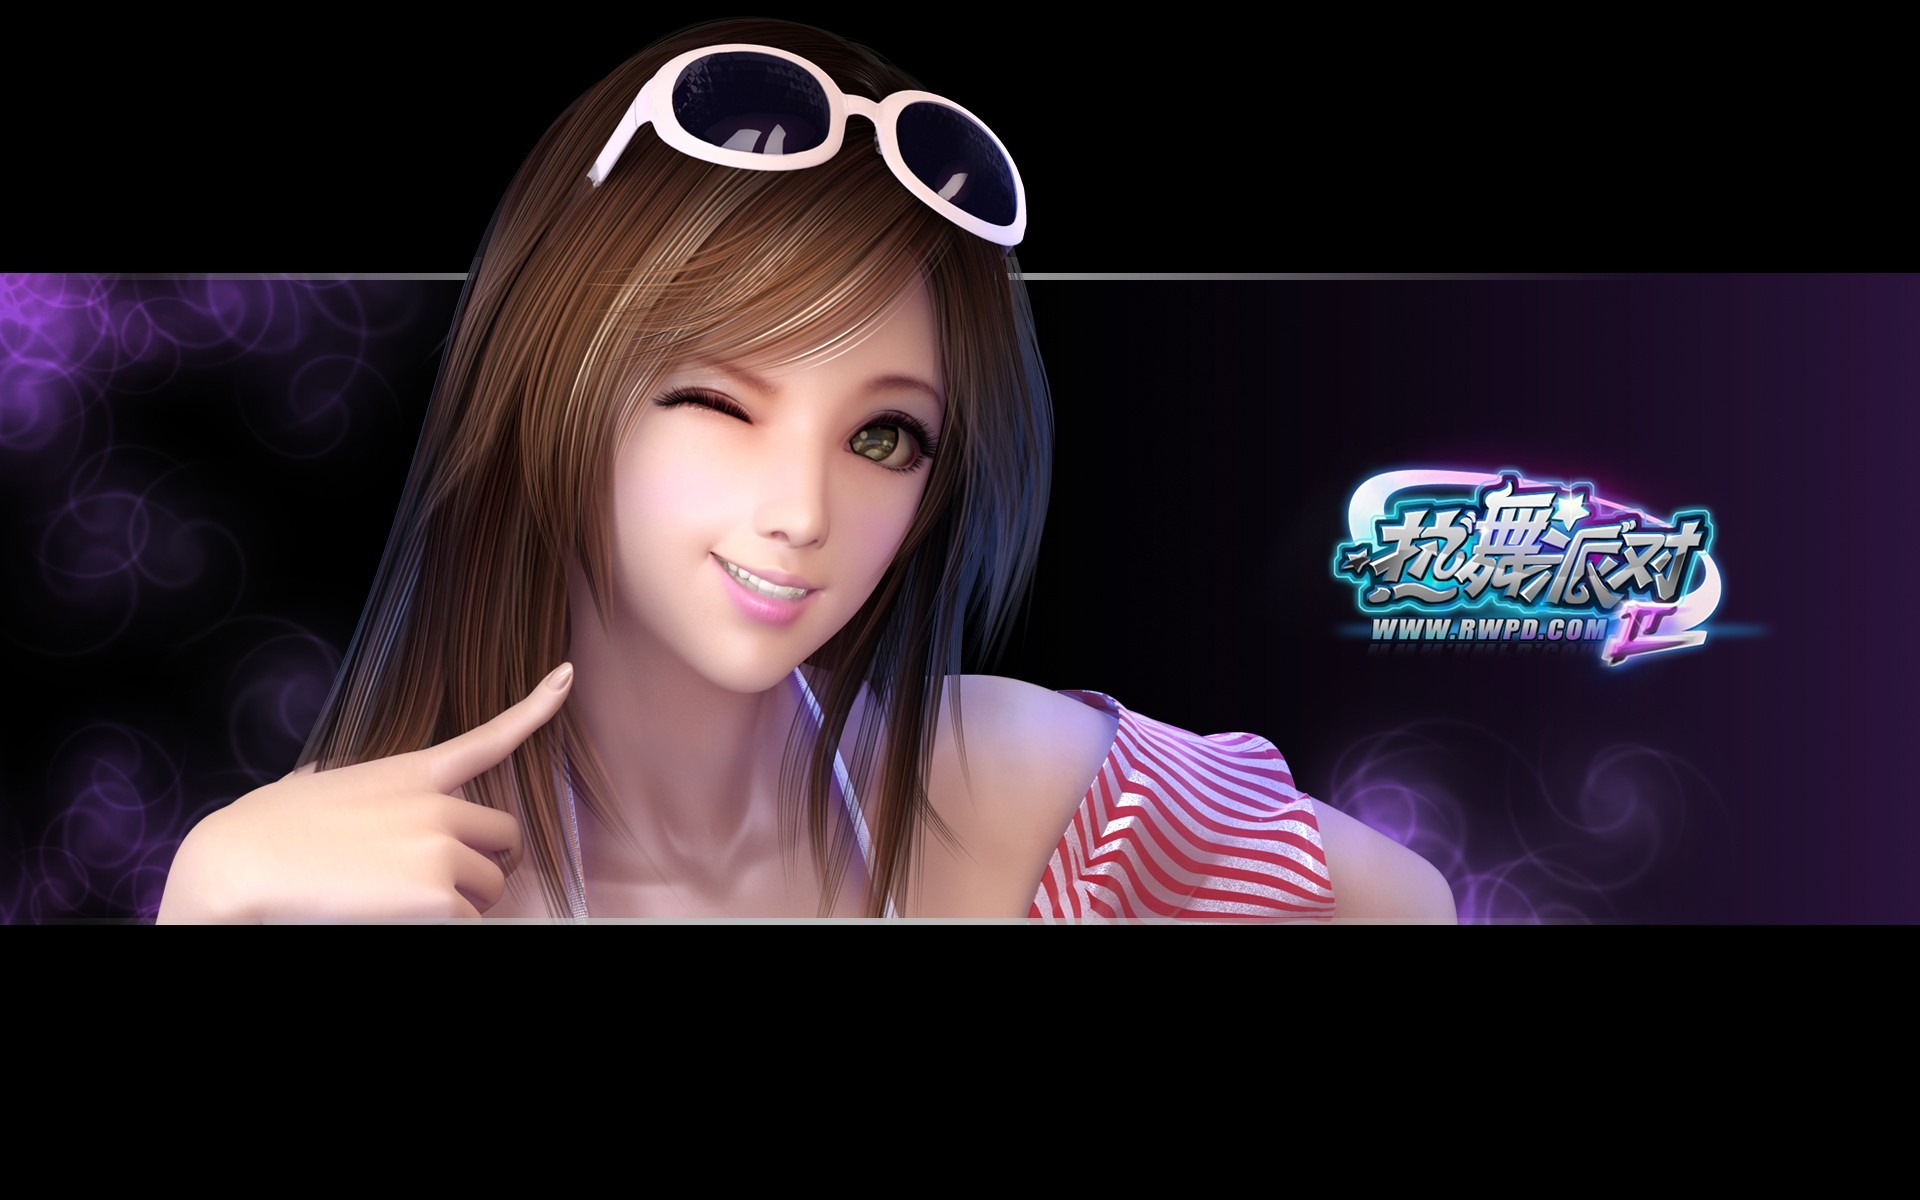 Online game Hot Dance Party II official wallpapers #5 - 1920x1200